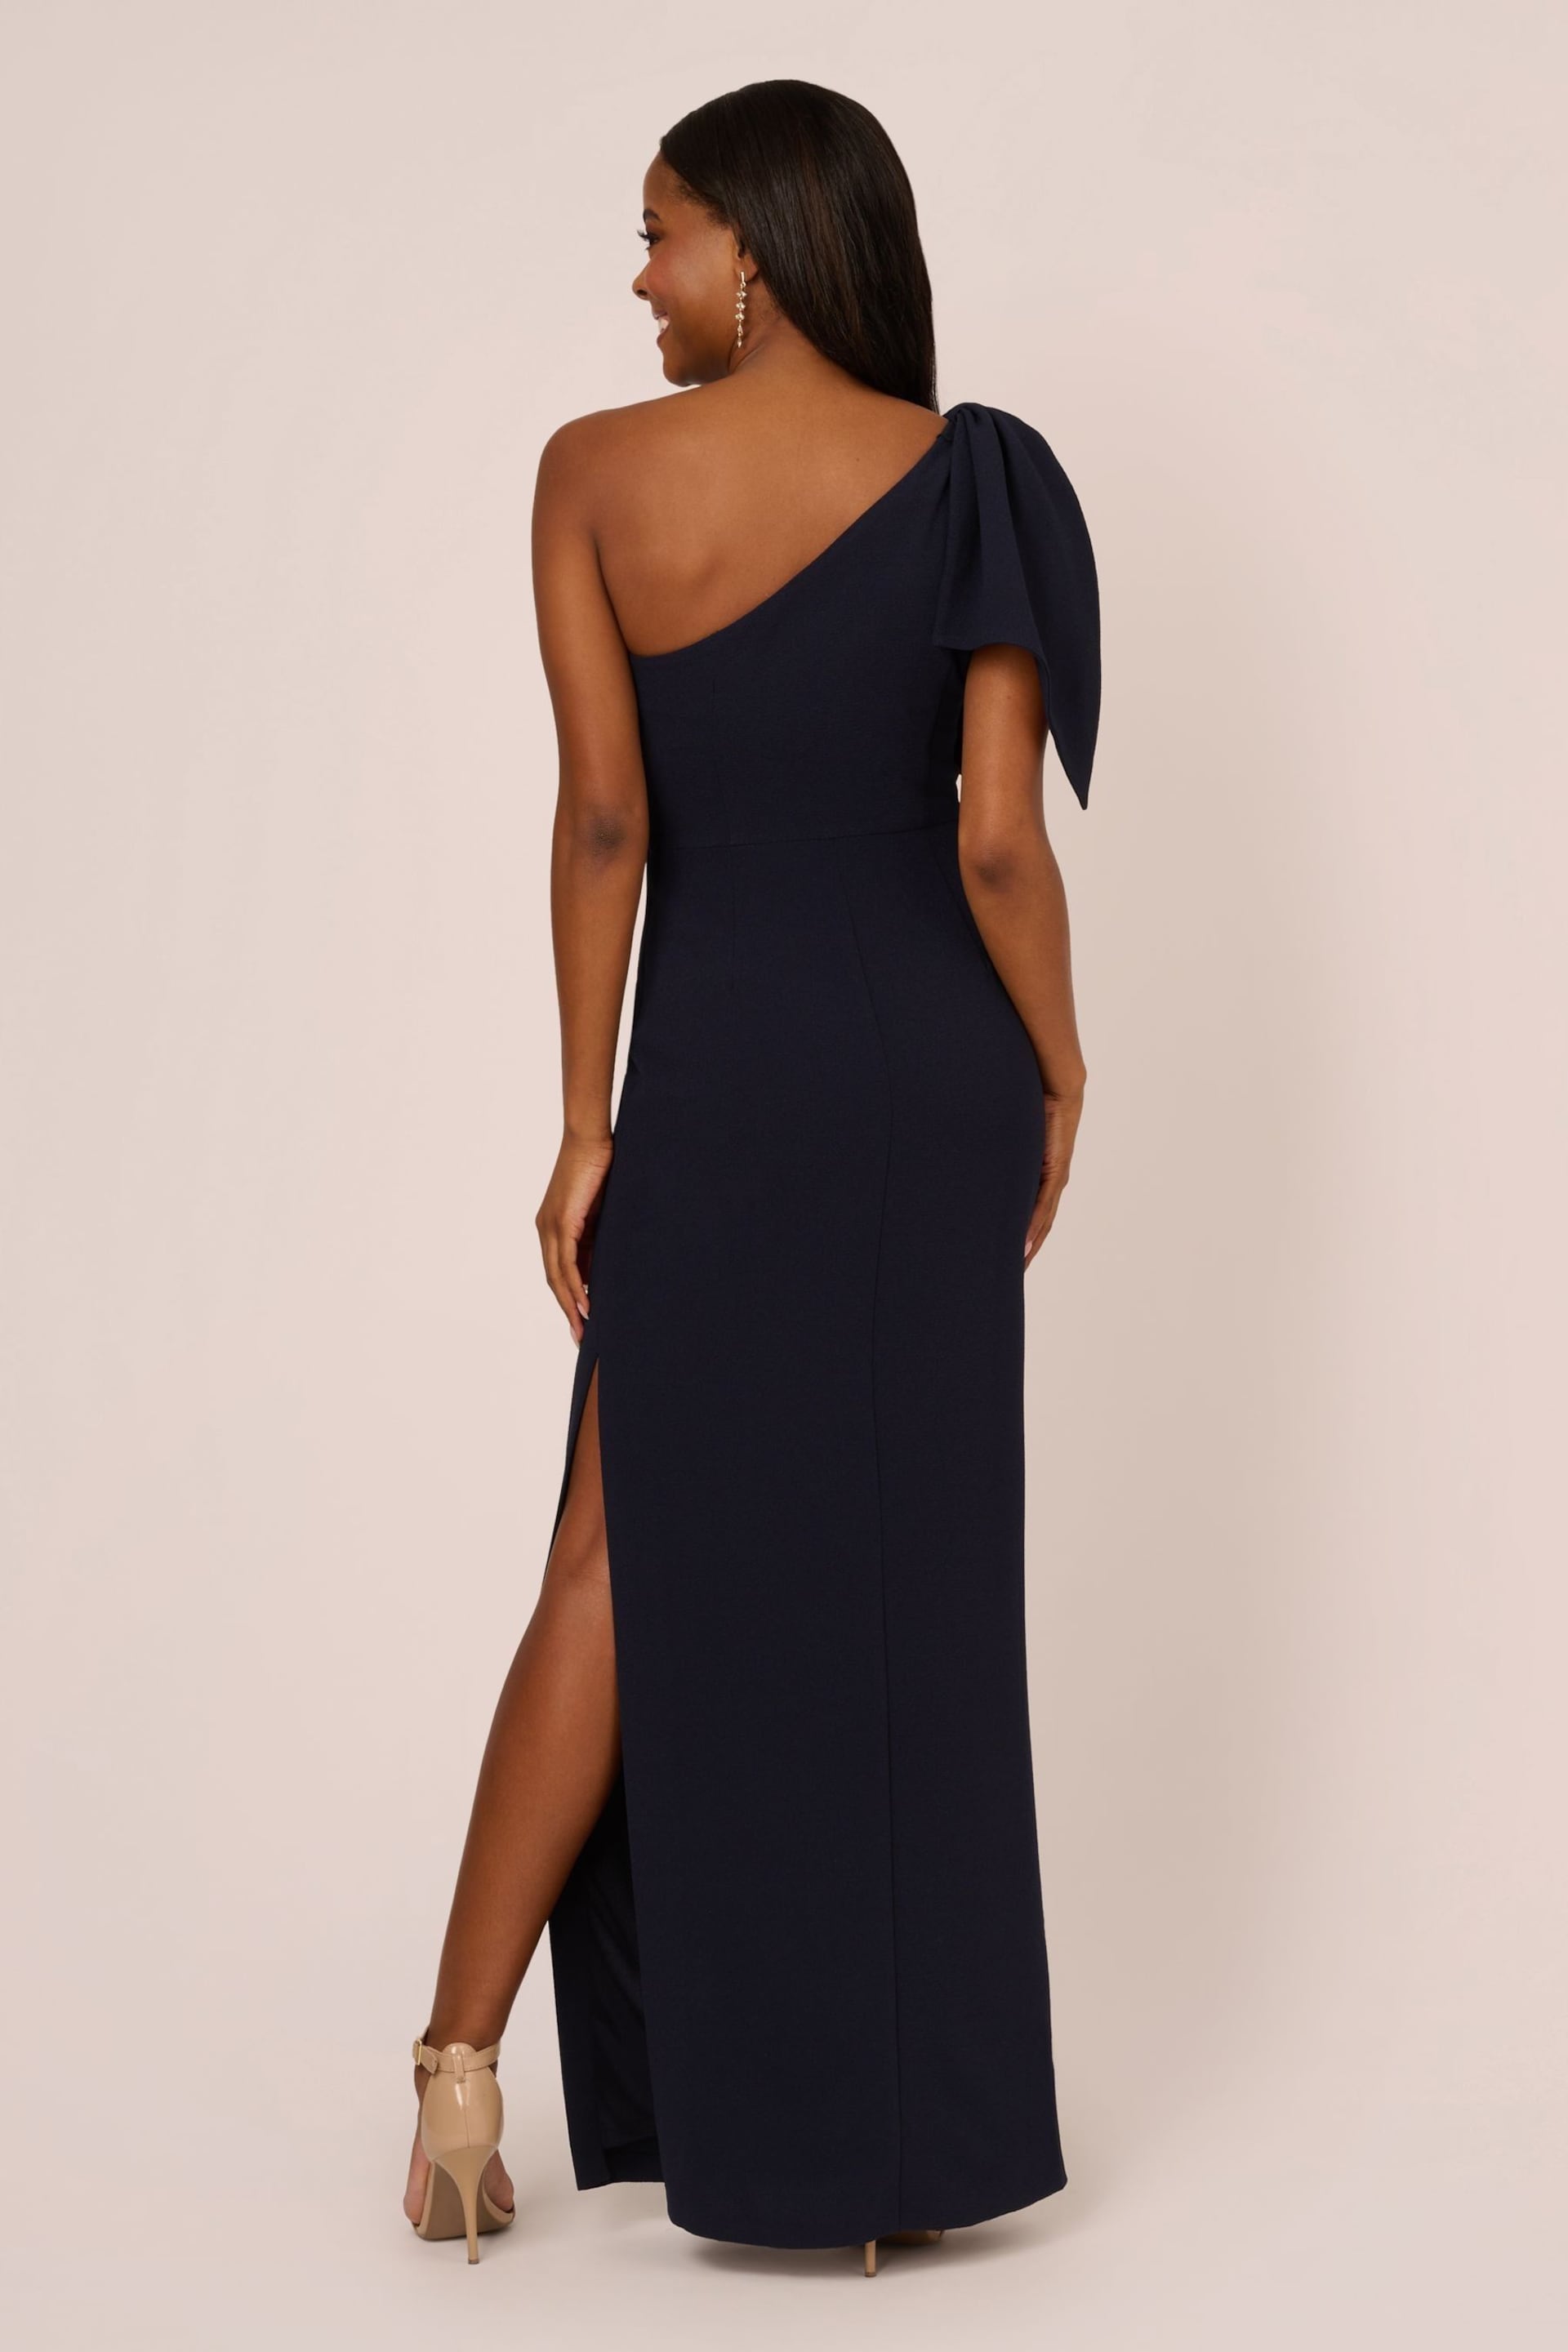 Adrianna Papell Blue One Shoulder Gown - Image 2 of 7